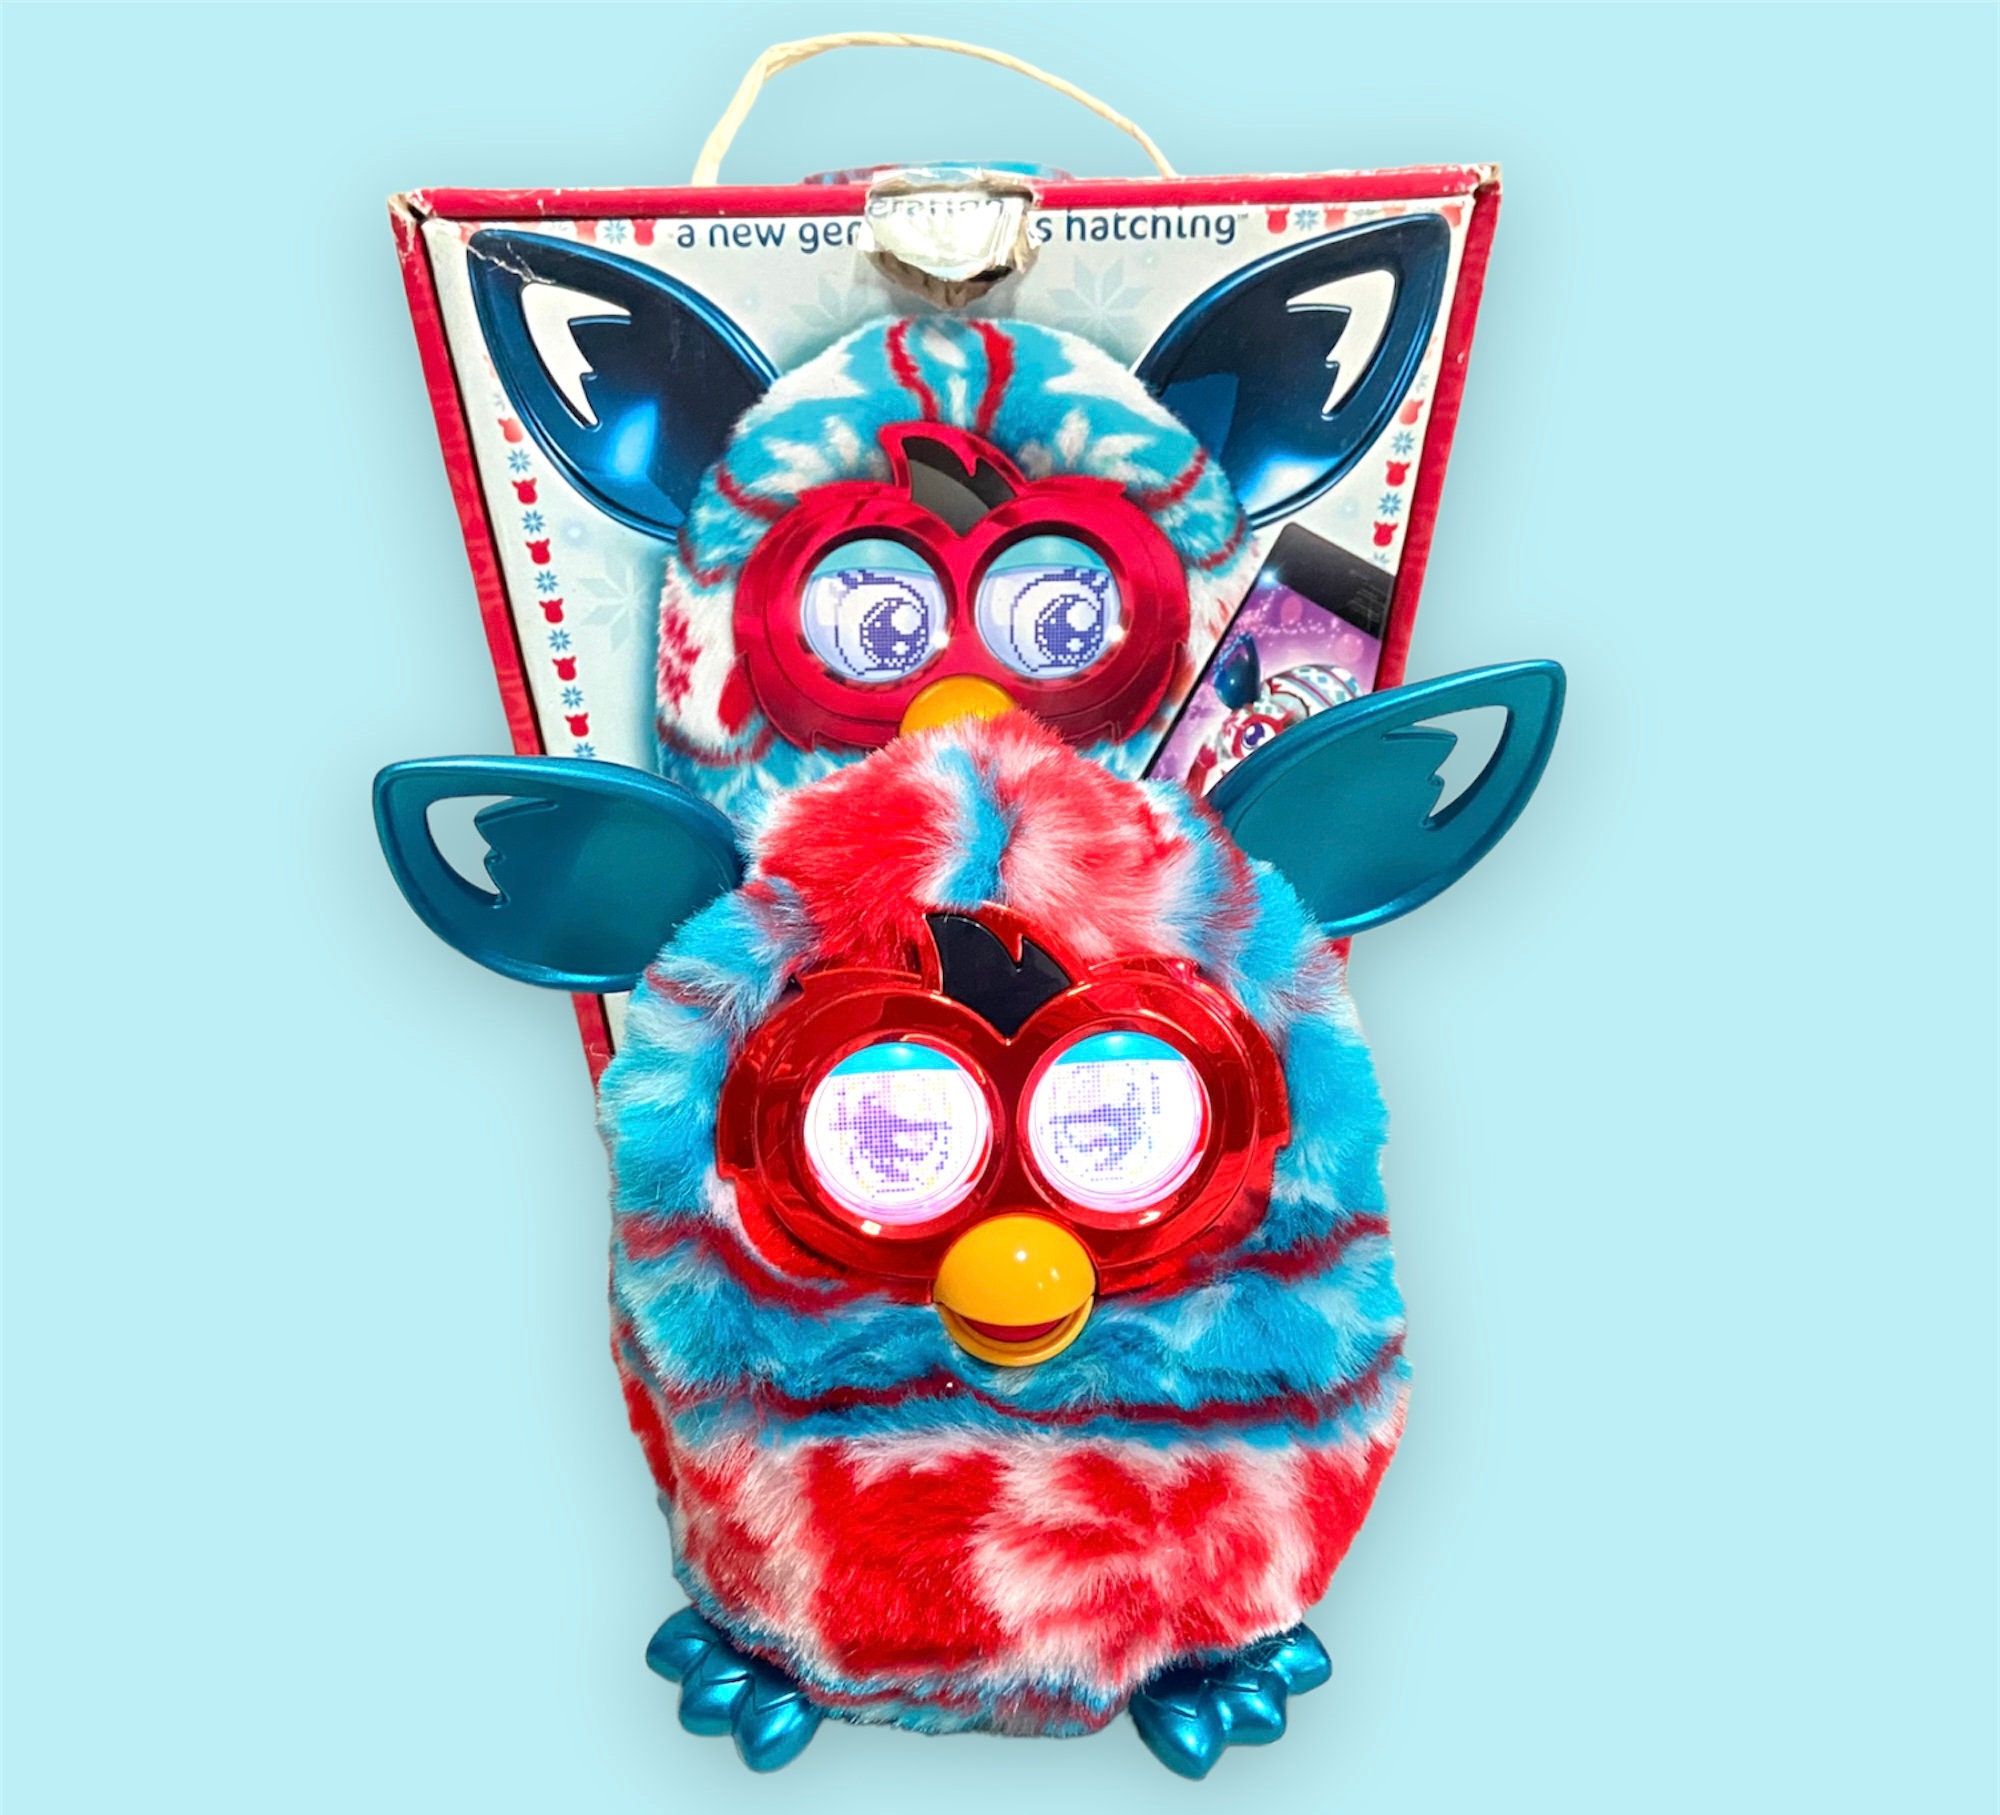  Furby Boom Plush Toy (Holiday Sweater Edition) : Toys & Games